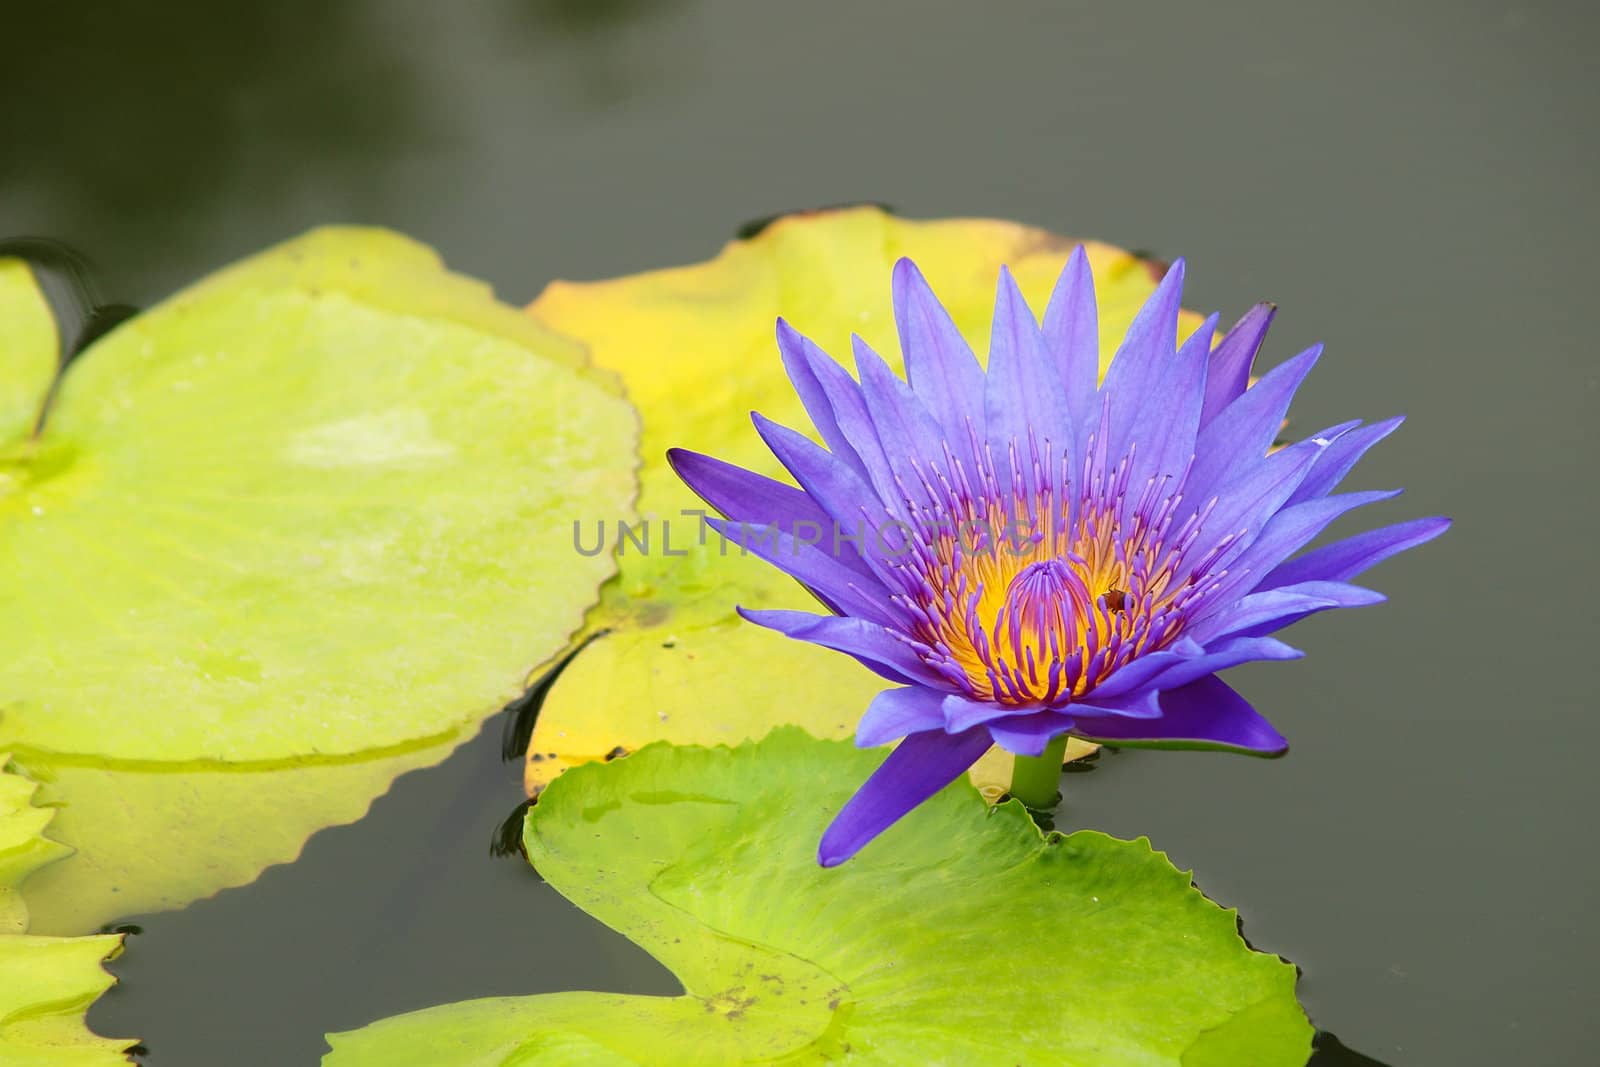 Close-up of colorful purple water lily